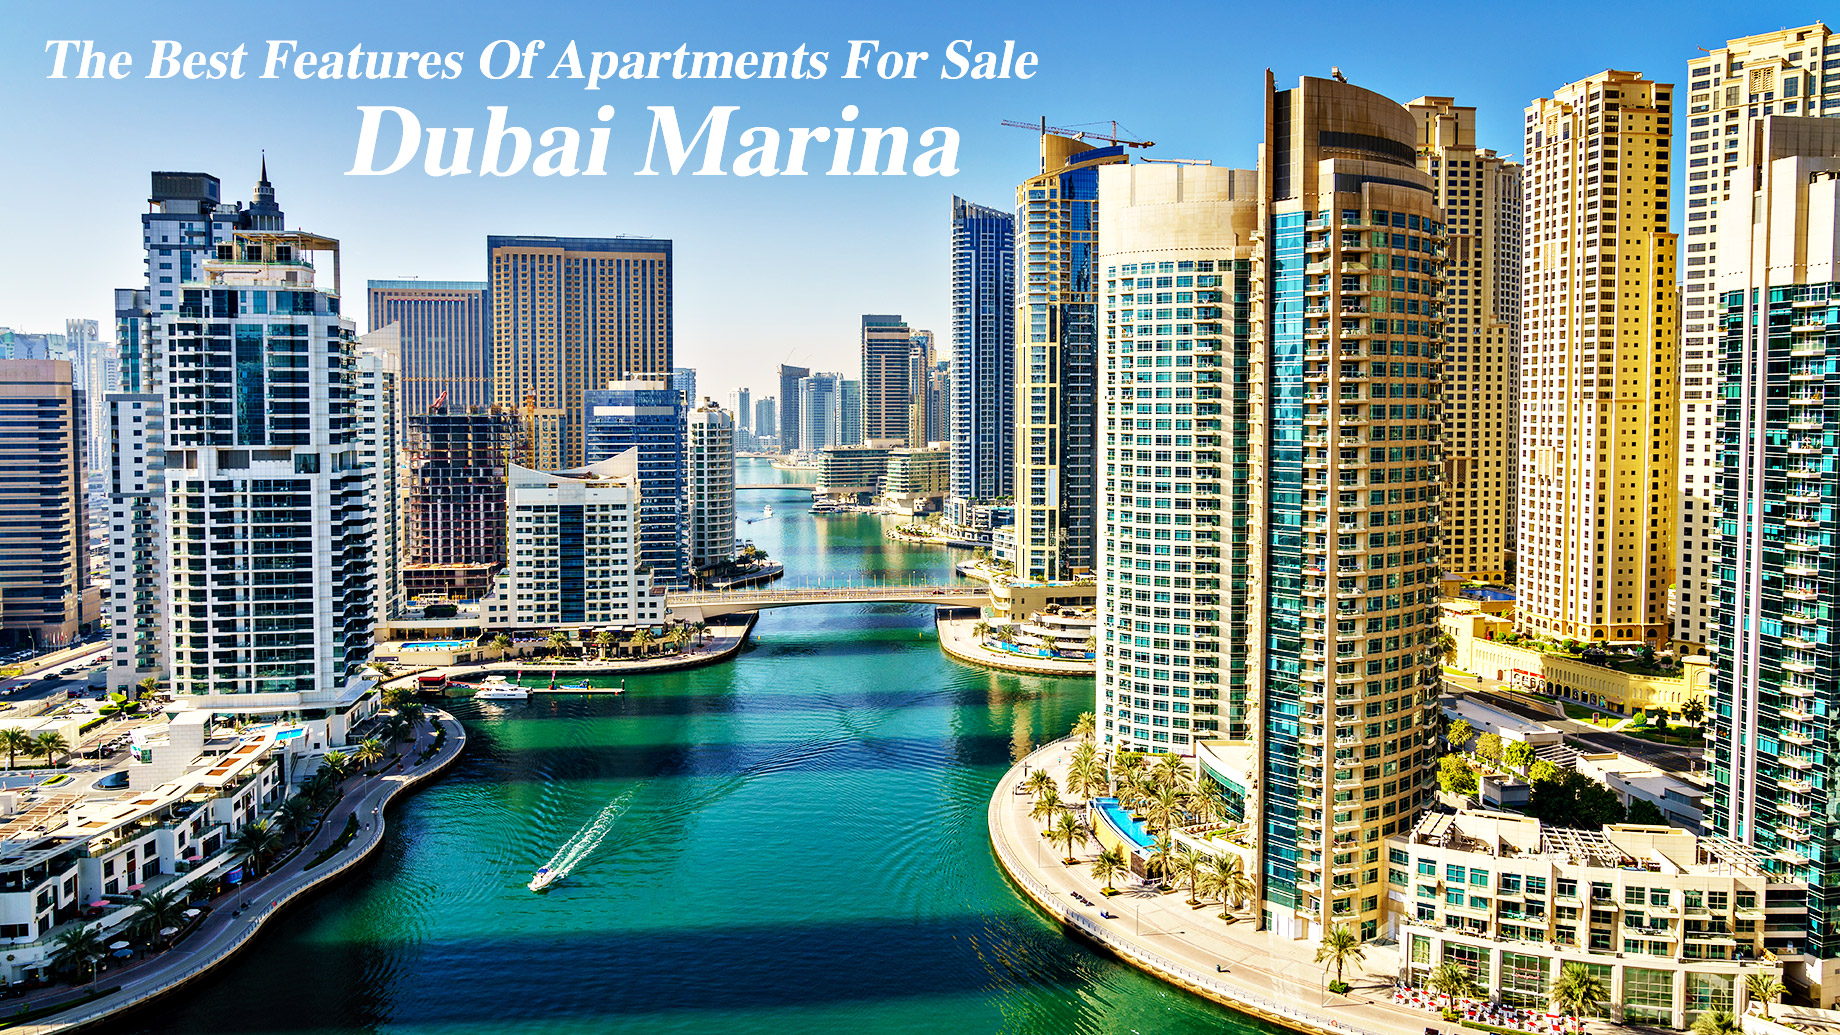 The Best Features Of Apartments For Sale In Dubai Marina